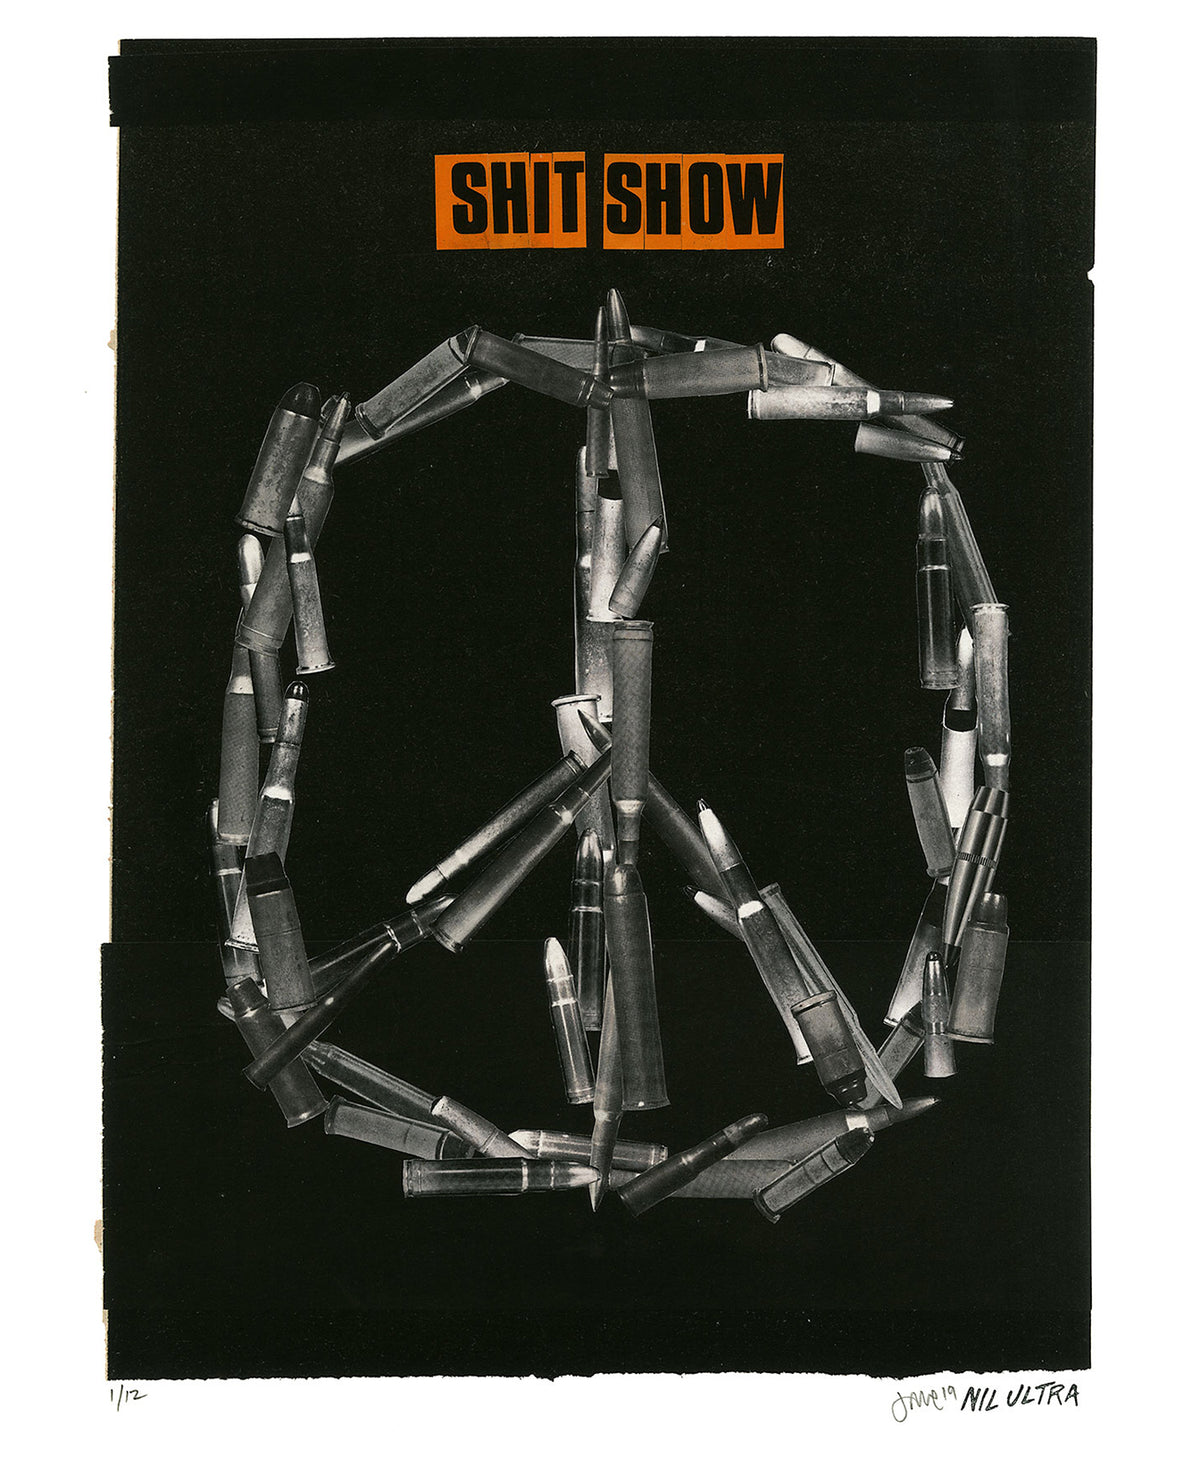 Nil Ultra &quot;Shit Show&quot; - Archival Print, Limited Edition of 12 - 14 x 17&quot;